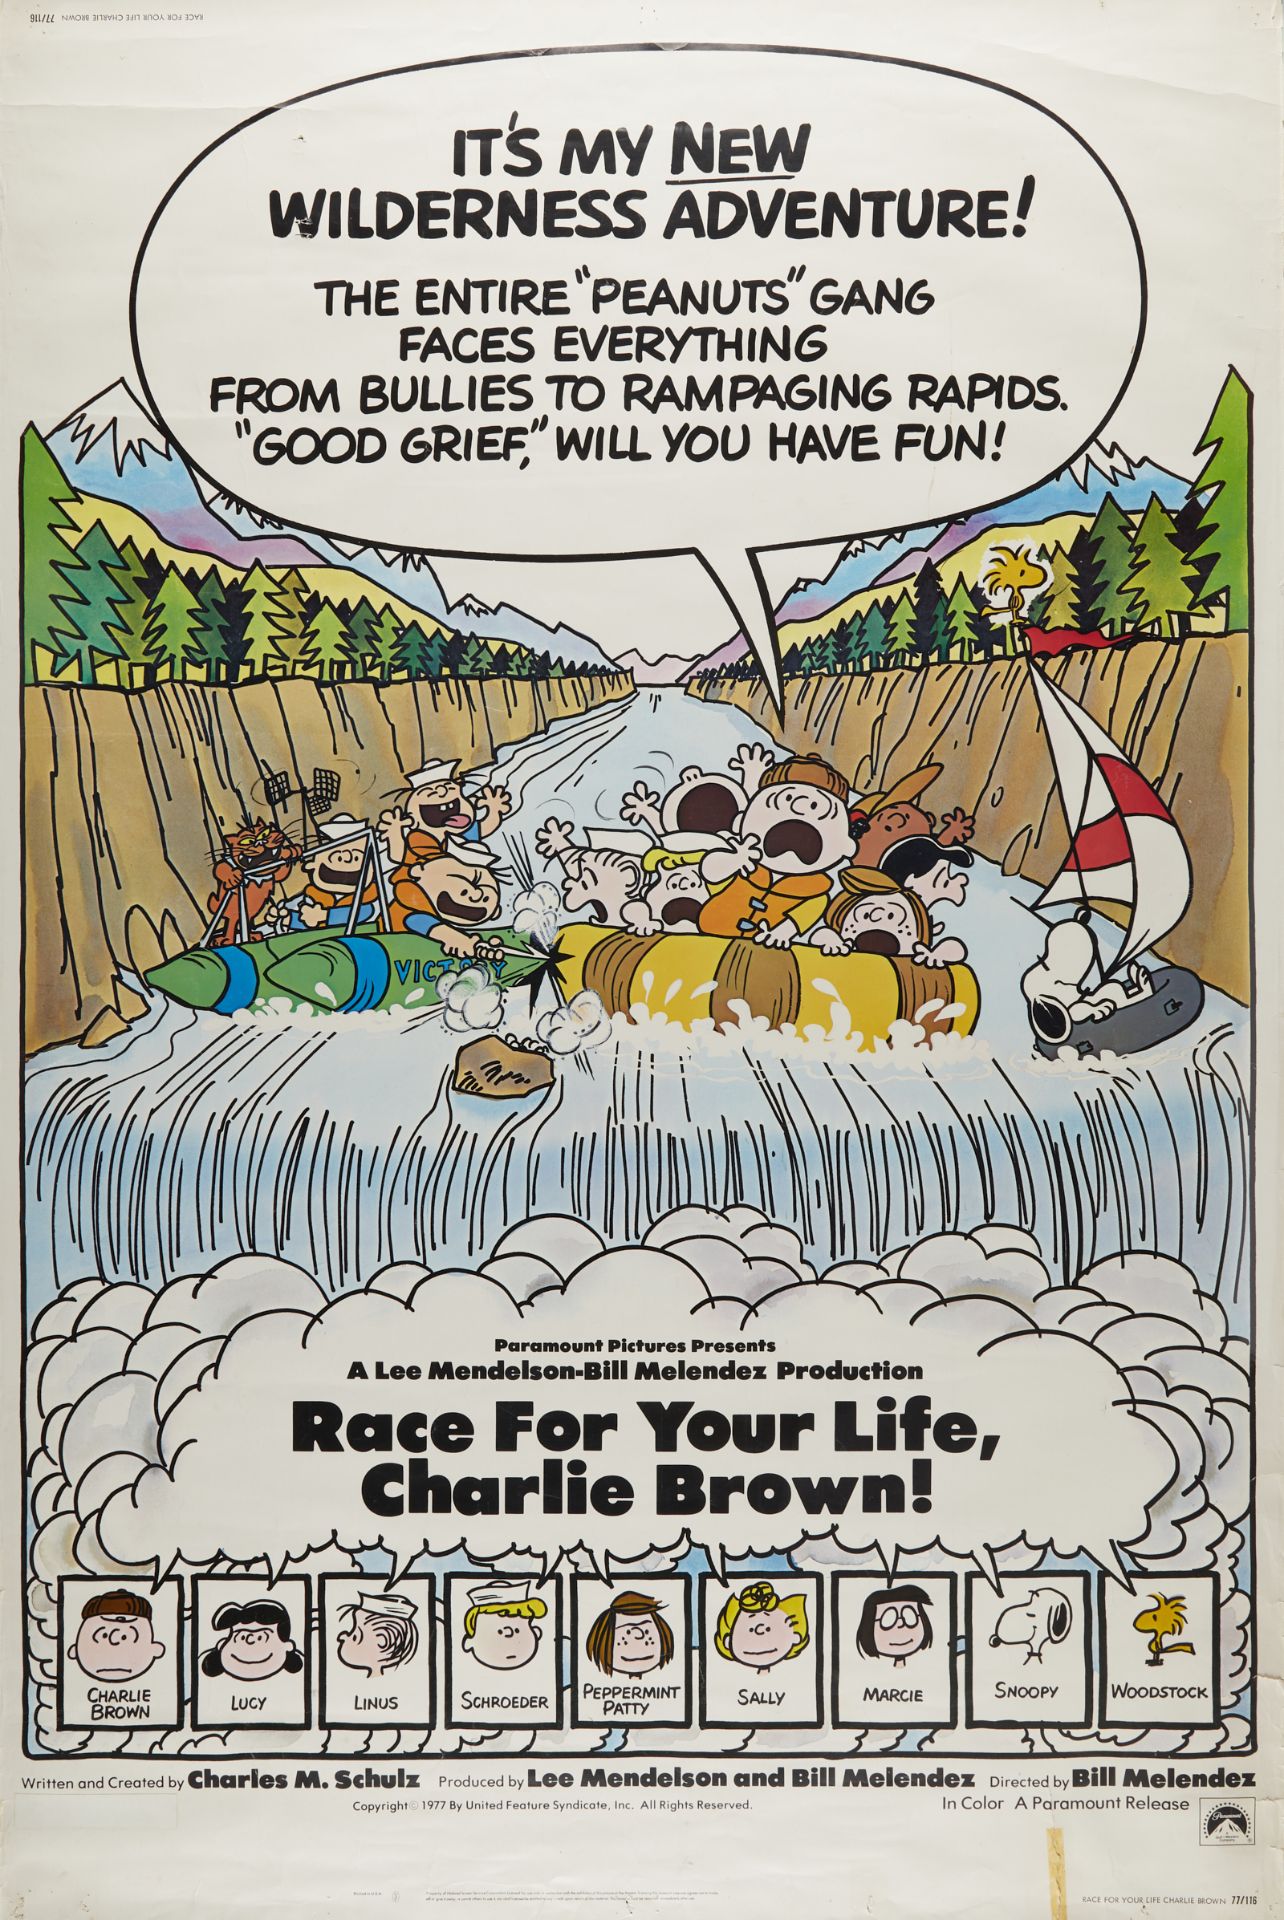 "Race for Your Life, Charlie Brown!" Movie Poster